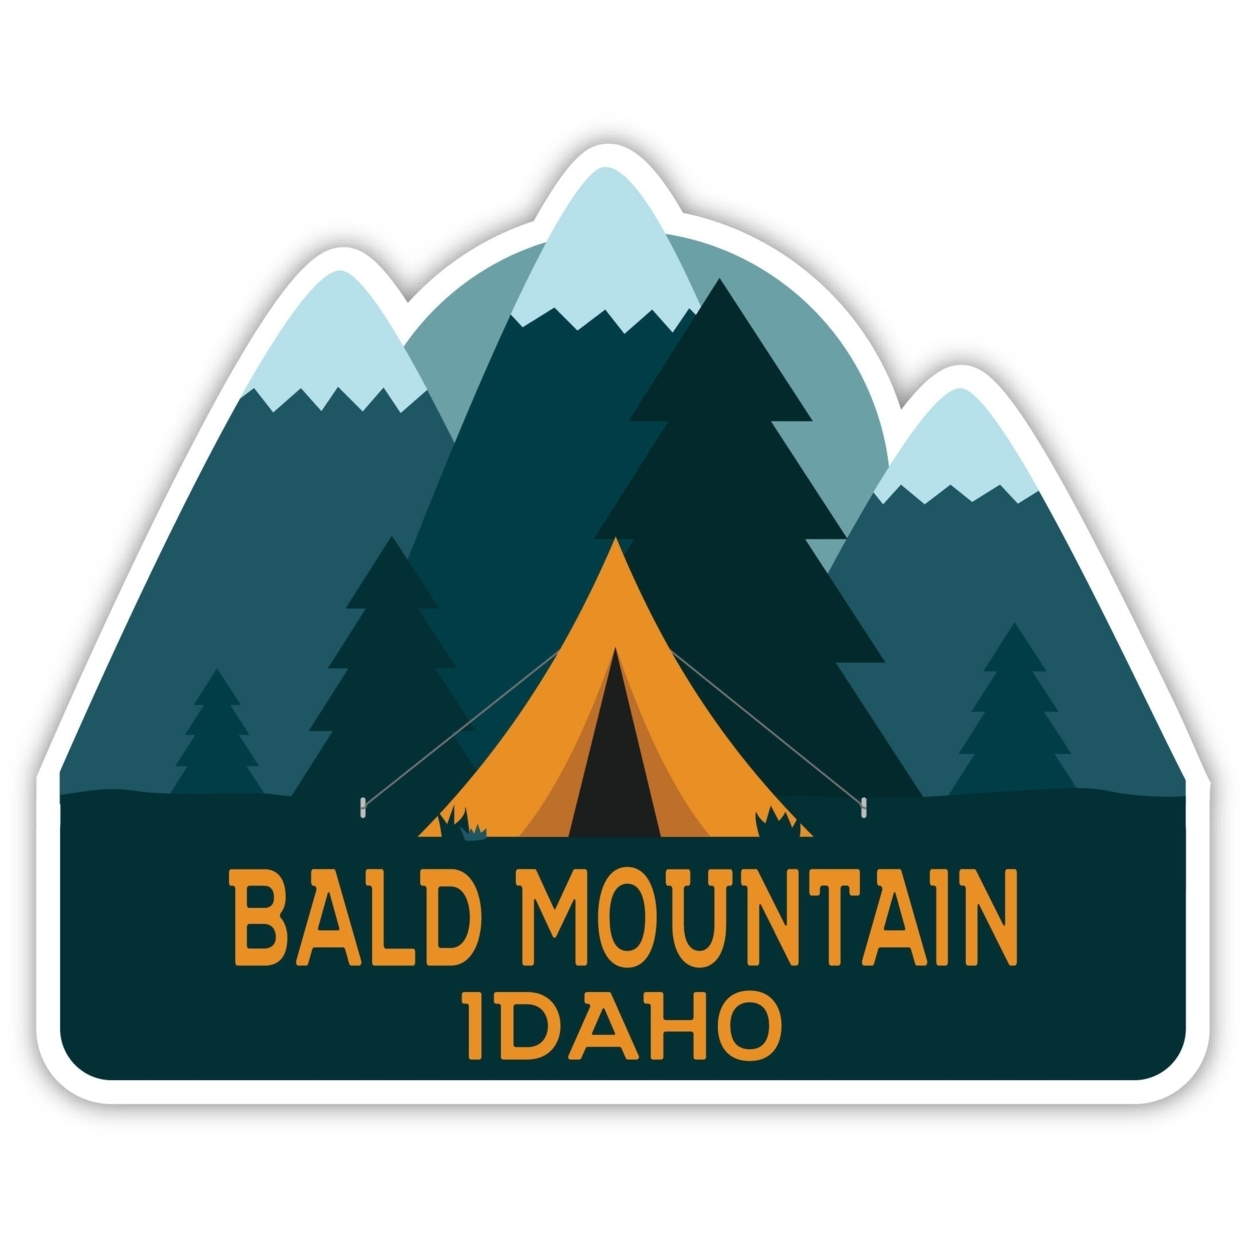 Bald Mountain Idaho Souvenir Decorative Stickers (Choose Theme And Size) - 4-Pack, 2-Inch, Tent